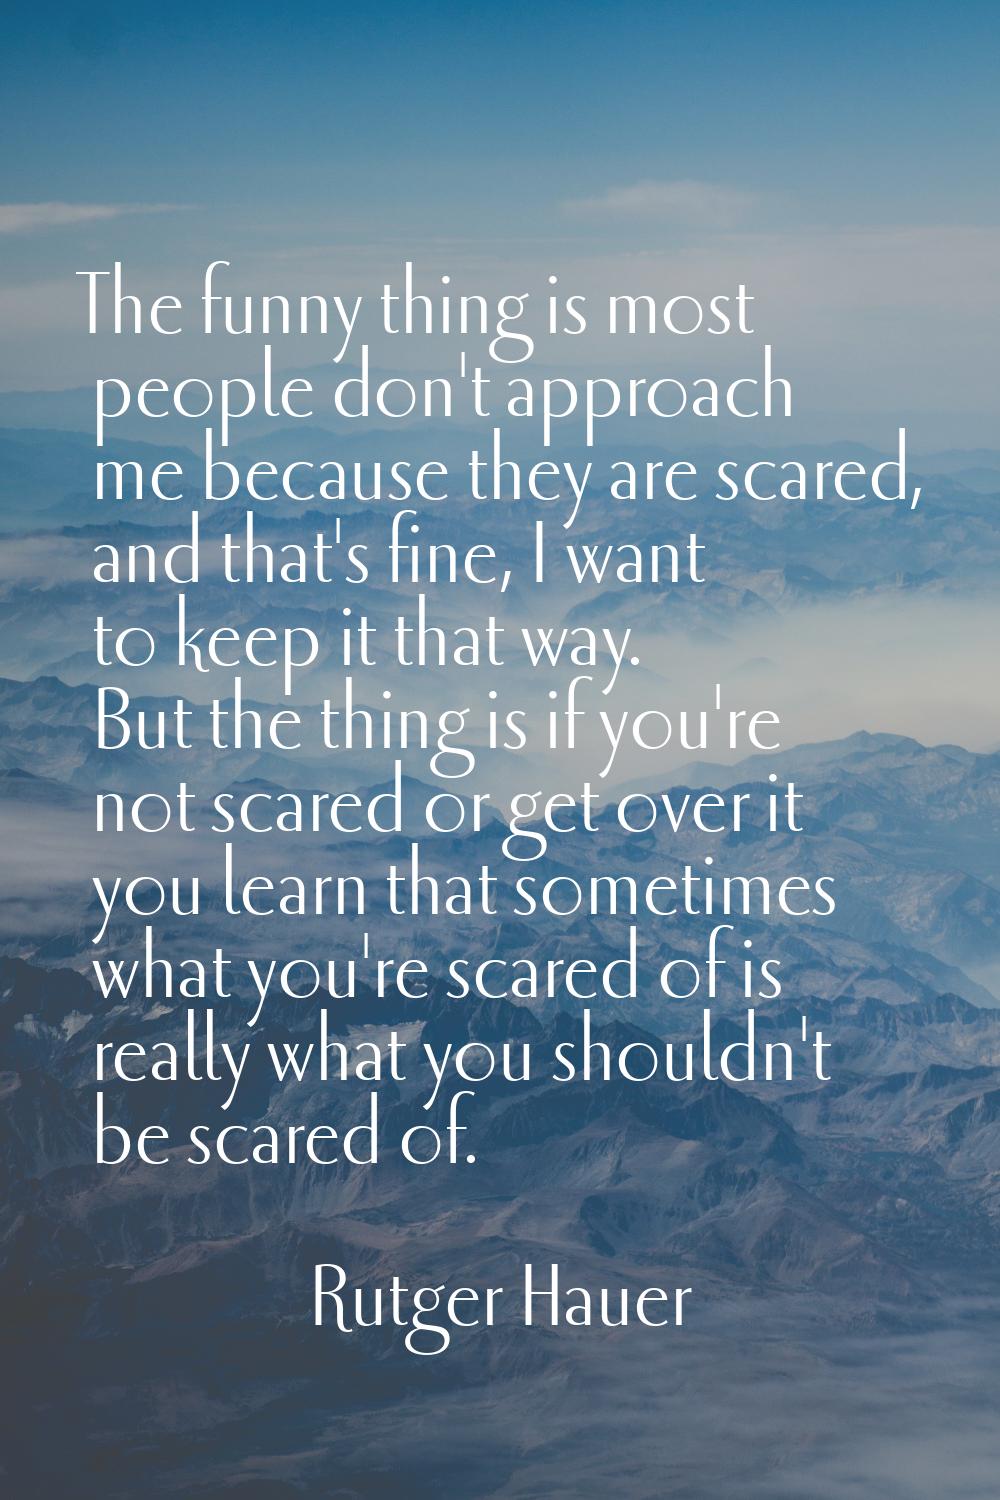 The funny thing is most people don't approach me because they are scared, and that's fine, I want t